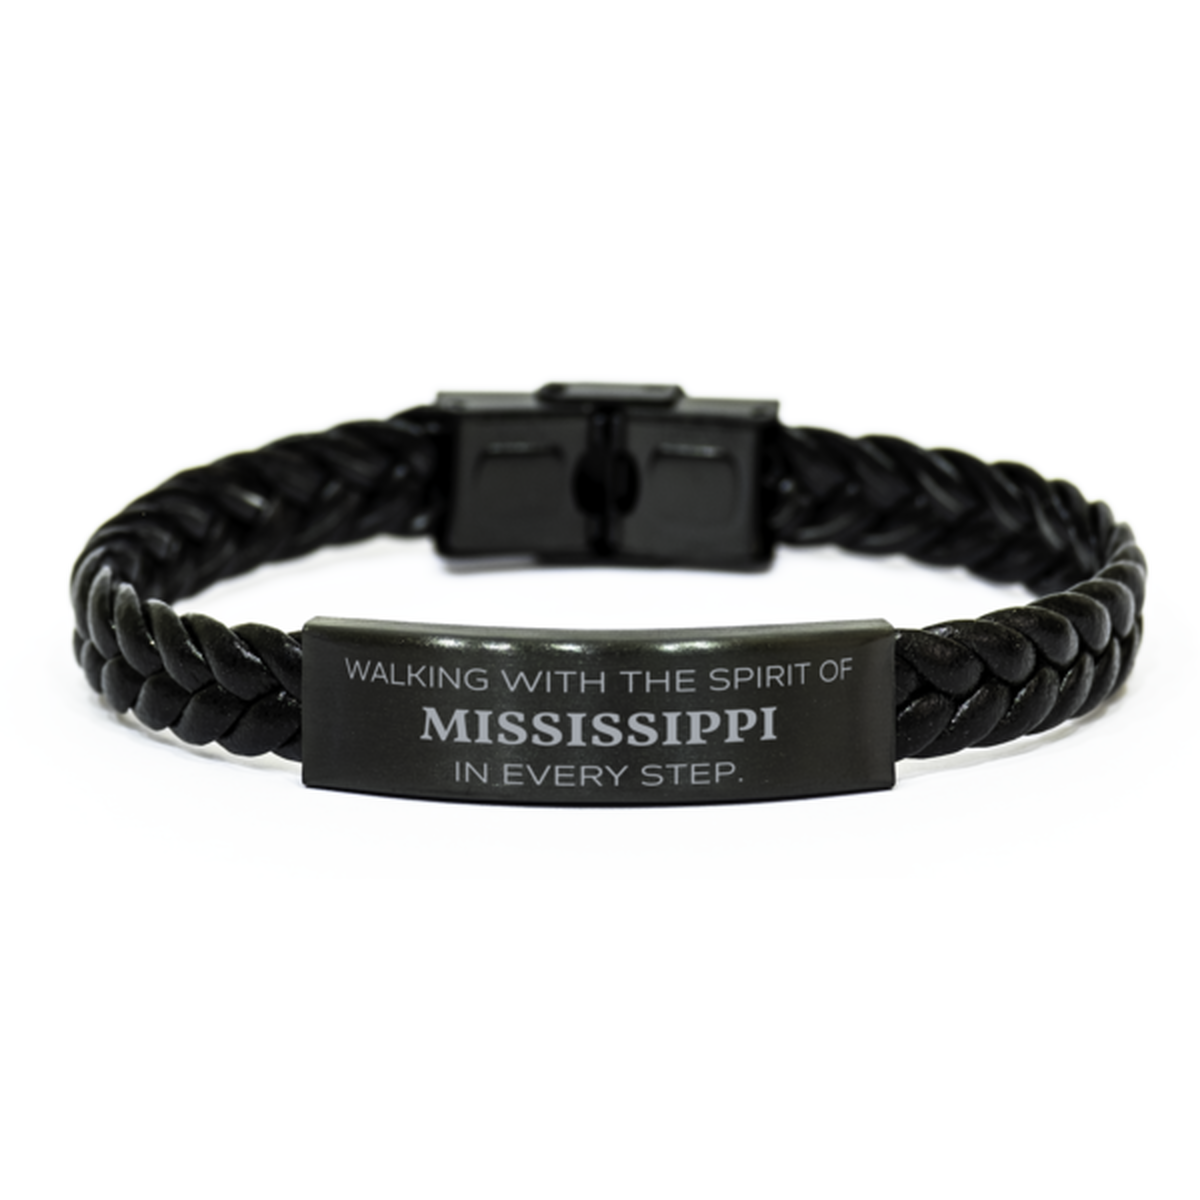 Mississippi Gifts, Walking with the spirit, Love Mississippi Birthday Christmas Braided Leather Bracelet For Mississippi People, Men, Women, Friends